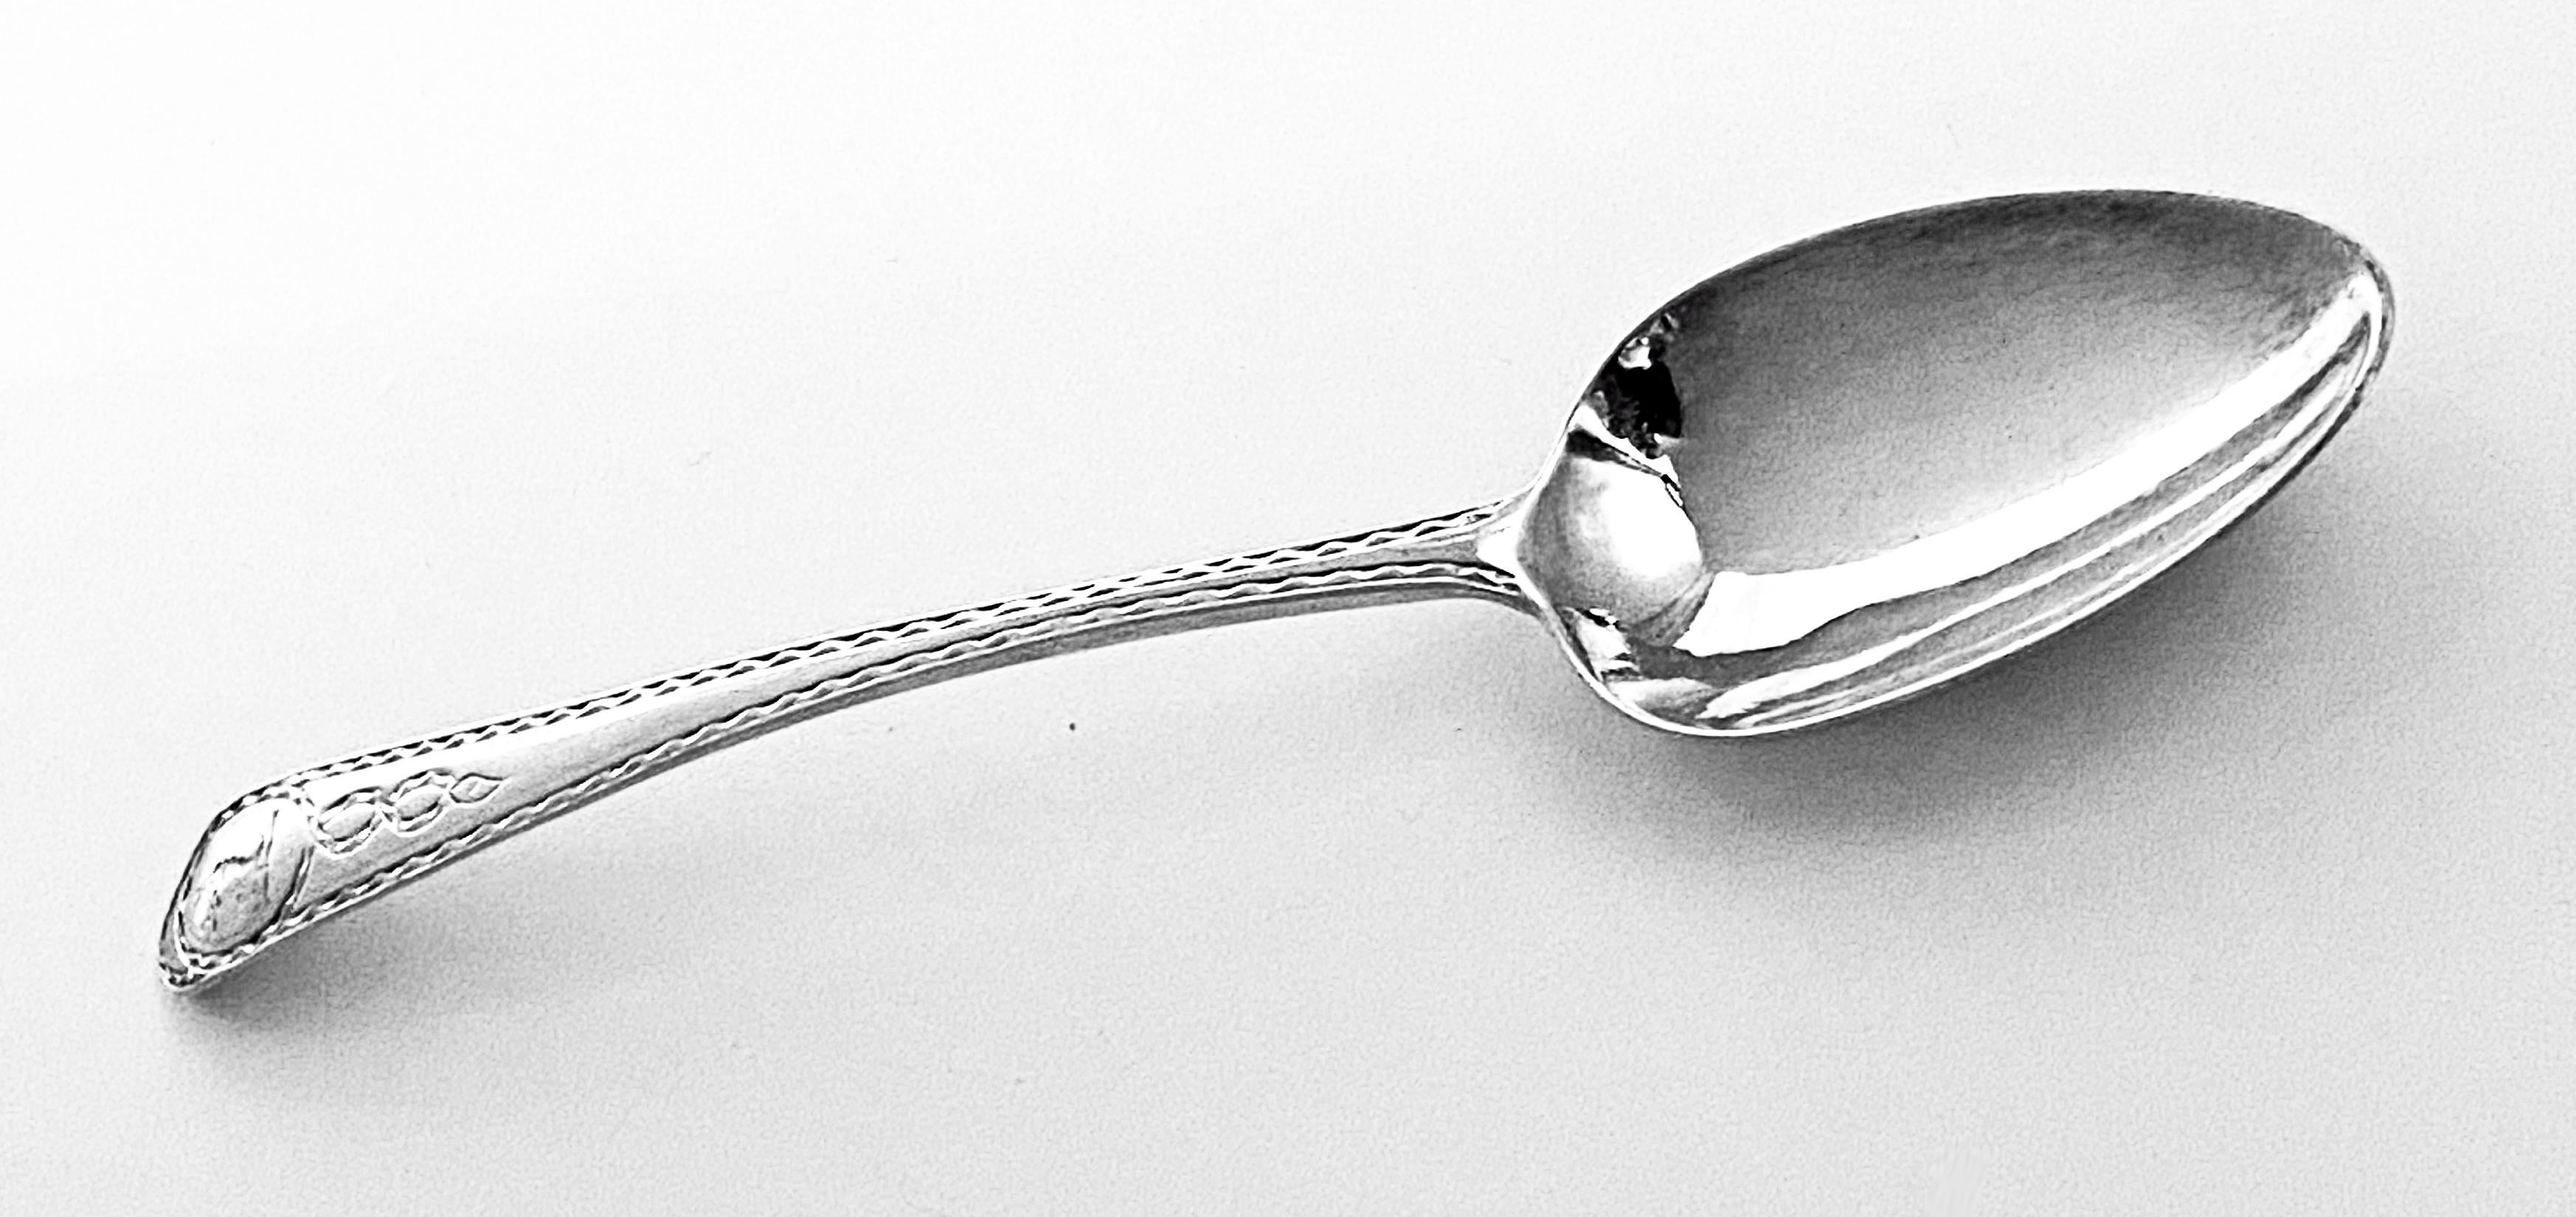 Irish Antique Silver Bright cut Celtic point Dessert Spoon Dublin C.1785 MS. Very nice crisp brightcut pattern and crest within a caduceus cartouche. Length: 6.75 inches. Marks slightly rubbed. Reflections from photography only